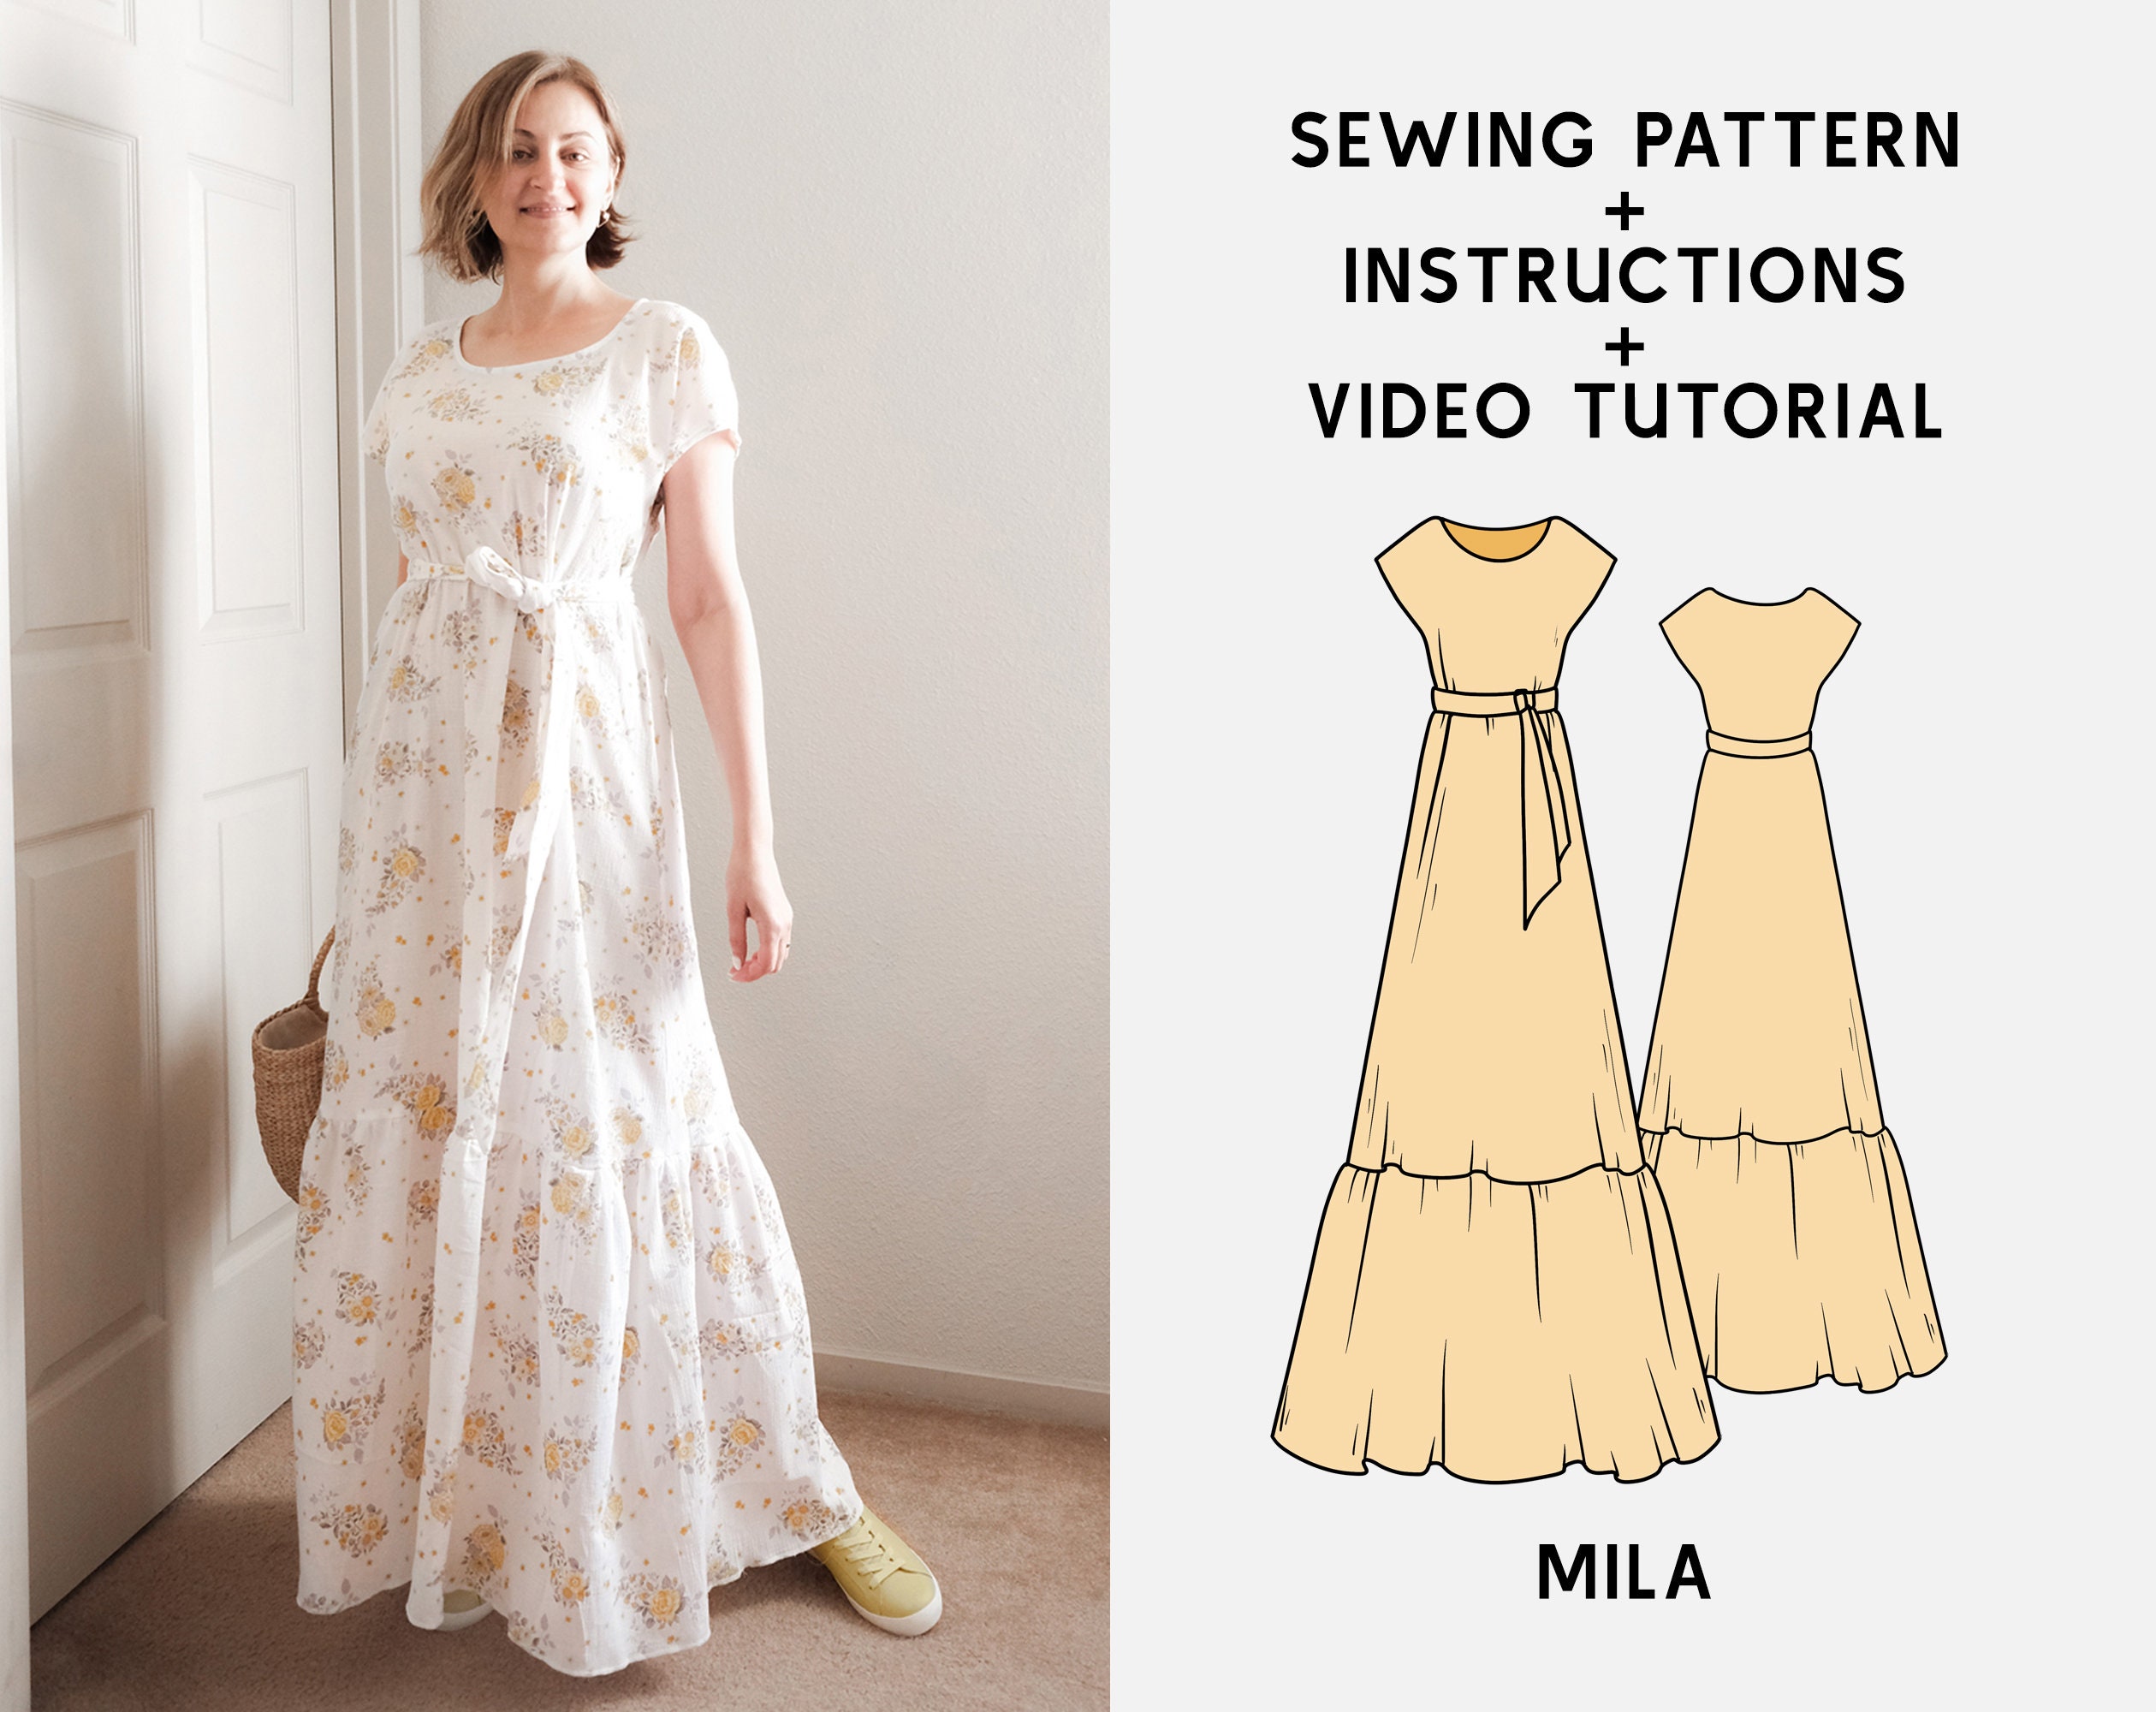 How to Hem a Dress: A Step-by-Step Guide - Textile Learner